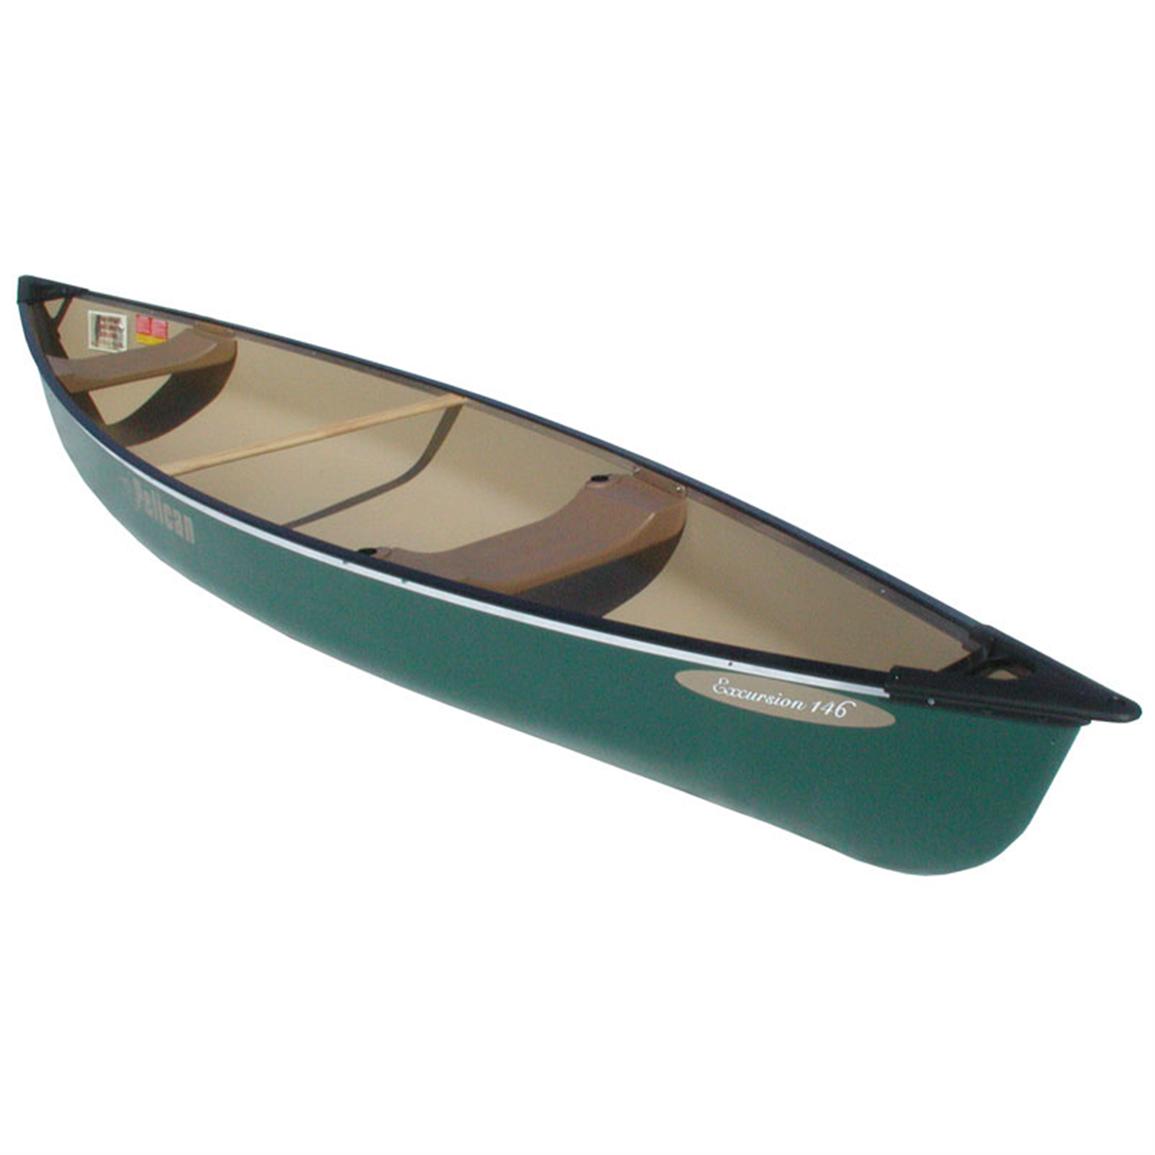 Pelican® Excursion 146 Canoe - 88261, Canoes & Kayaks at Sportsman's Guide